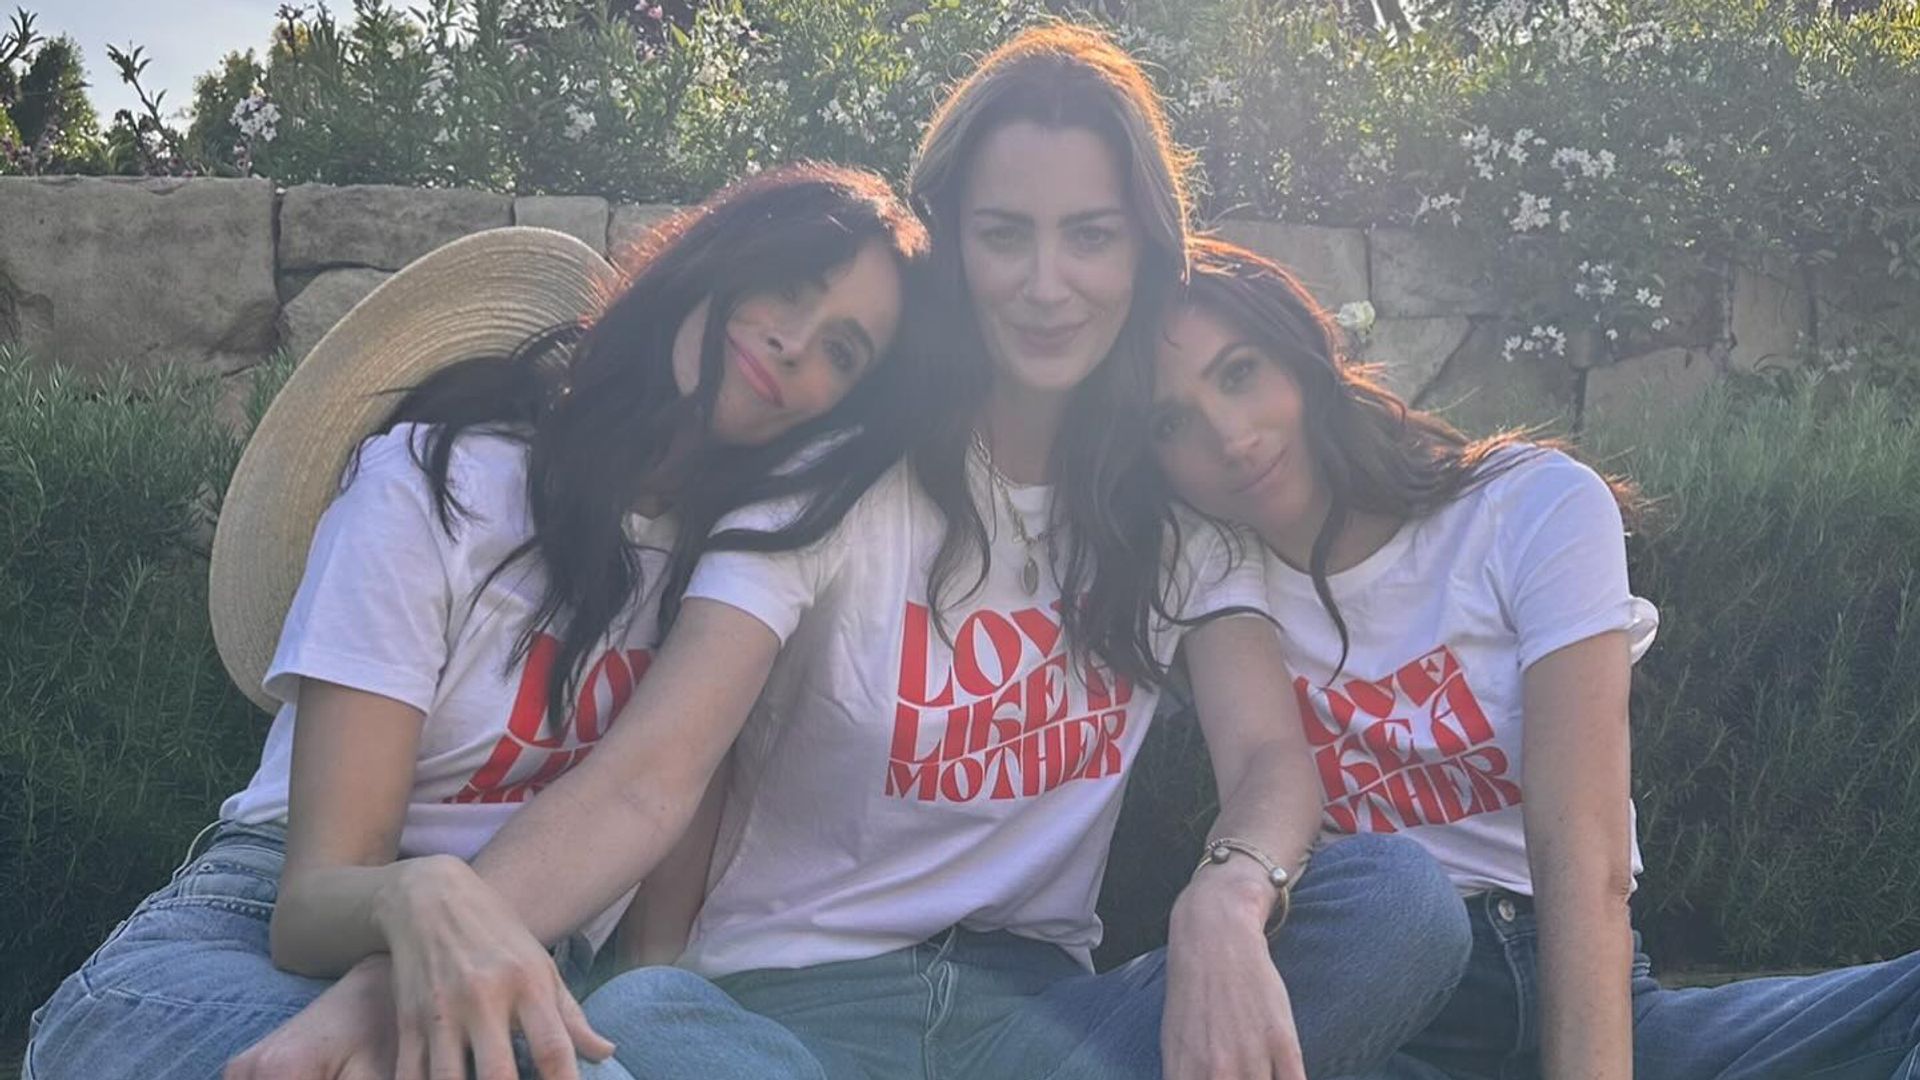 Abigail Spencer, Kelly McKee Zajfen and Meghan Markle wearing t-shirts and denim